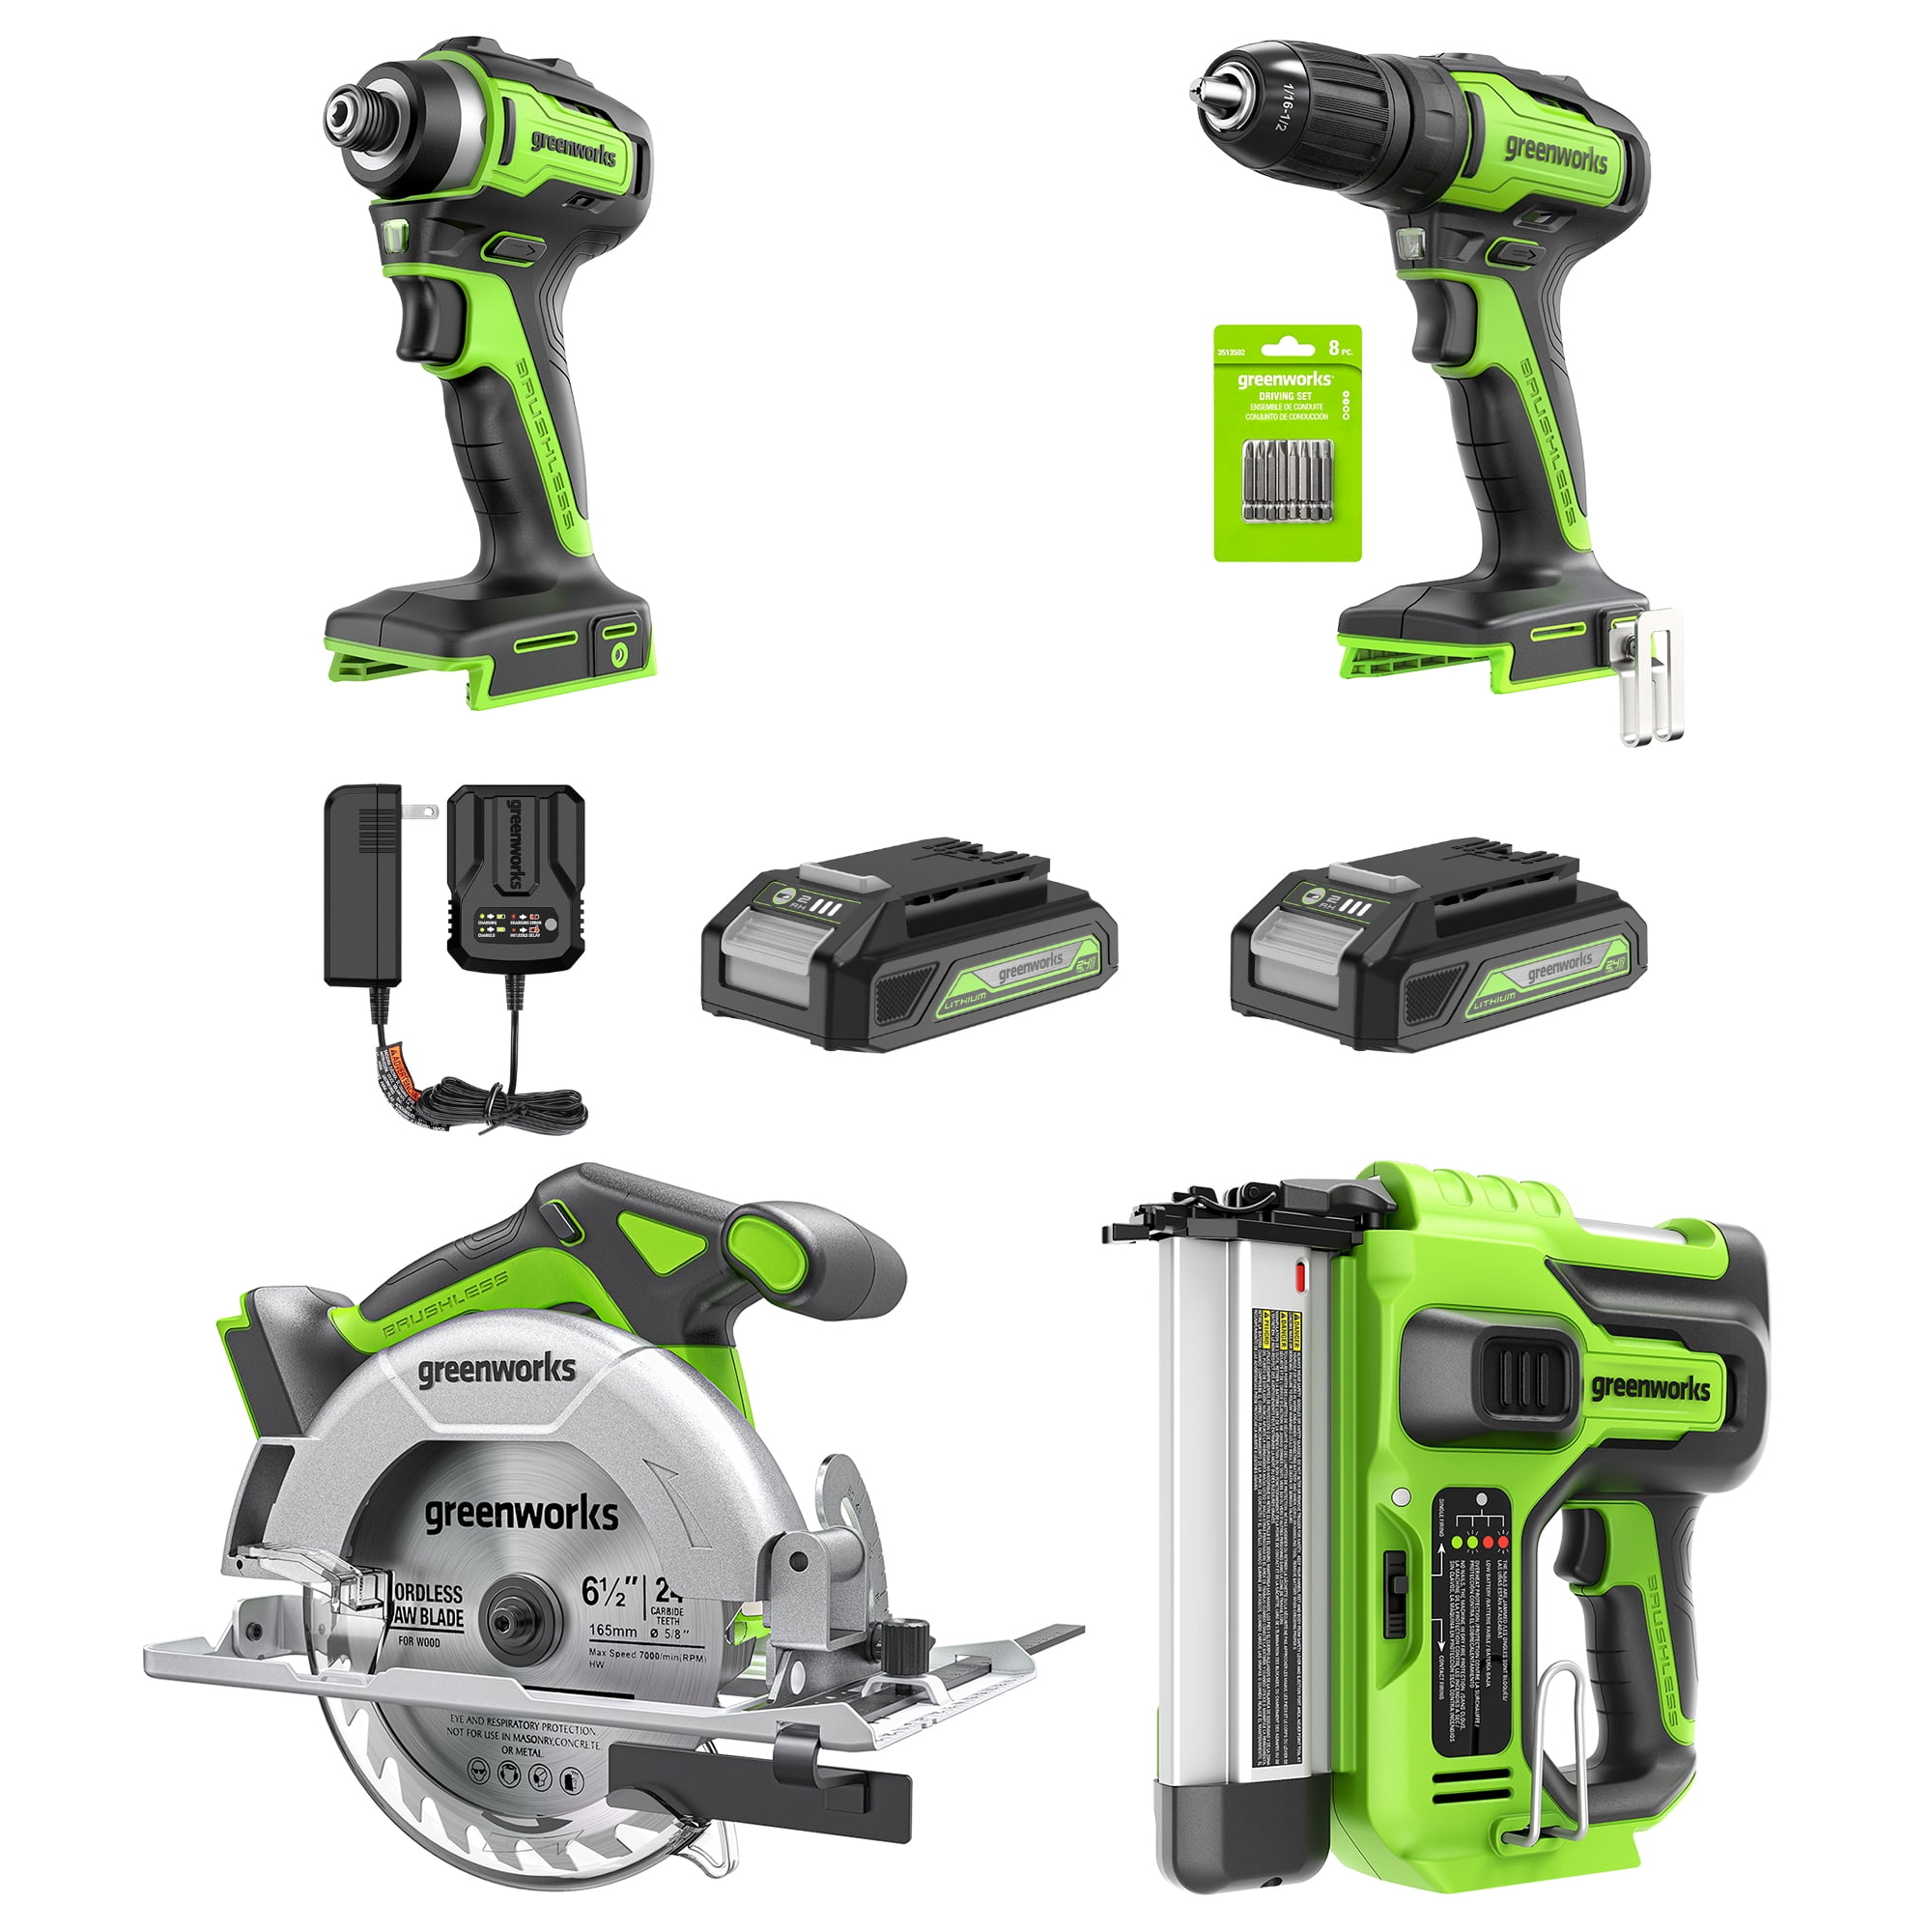 greenworkstools-24V Brushless Drill Kit w/ (2) 2Ah Batteries and Charger, 8-Piece Bit Set and Tool Bag Included